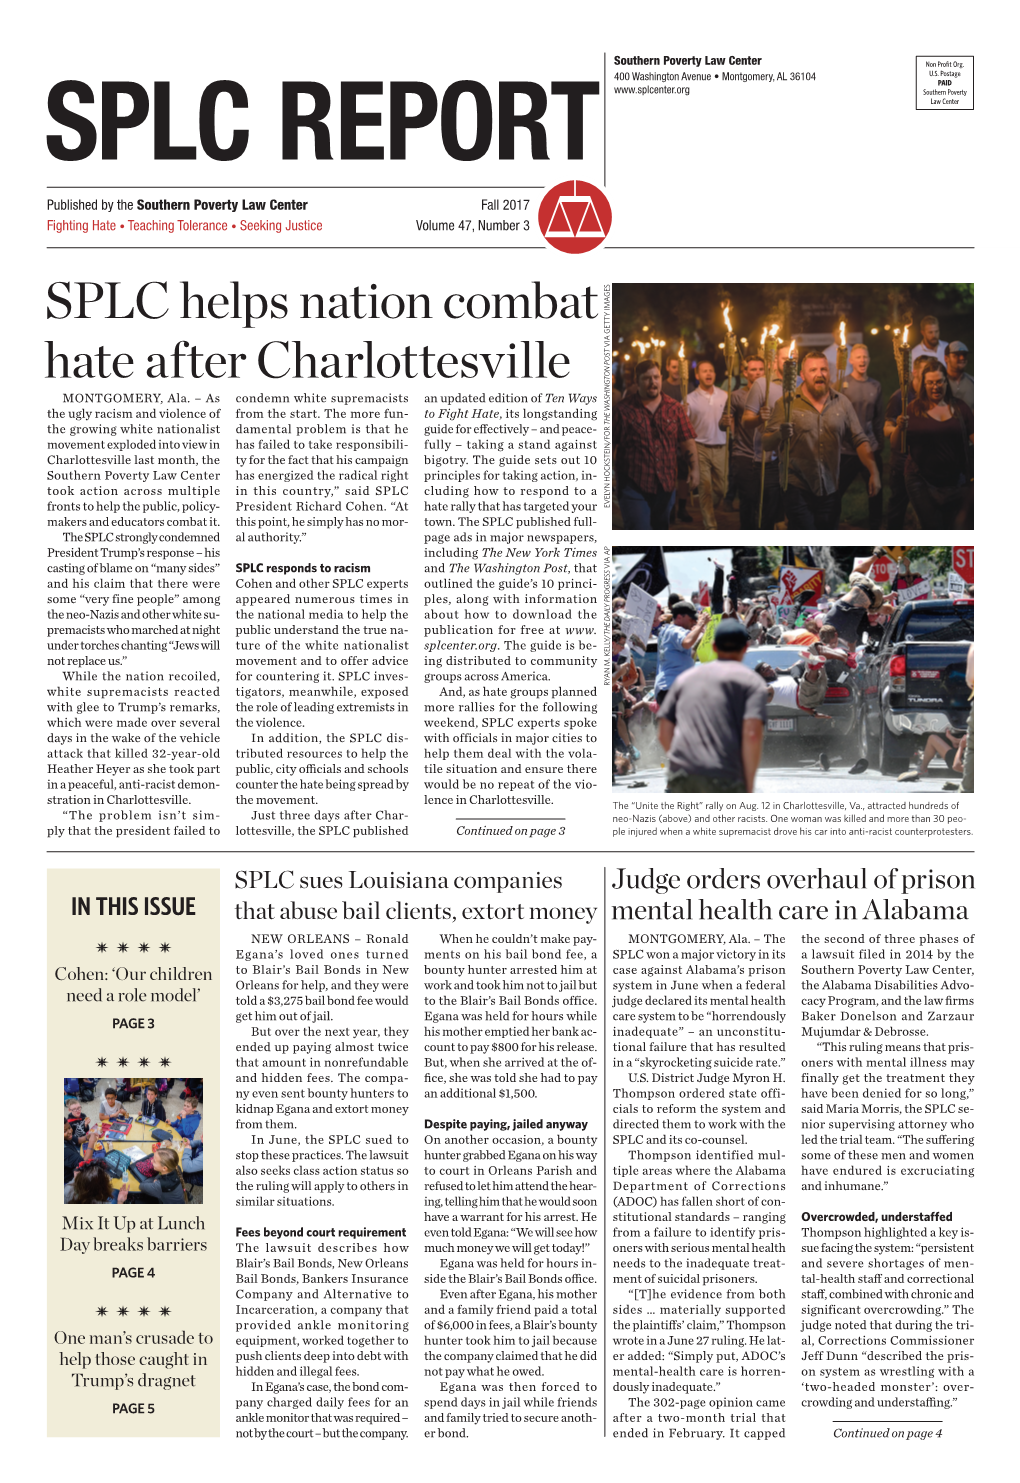 SPLC Helps Nation Combat Hate After Charlottesville MONTGOMERY, Ala